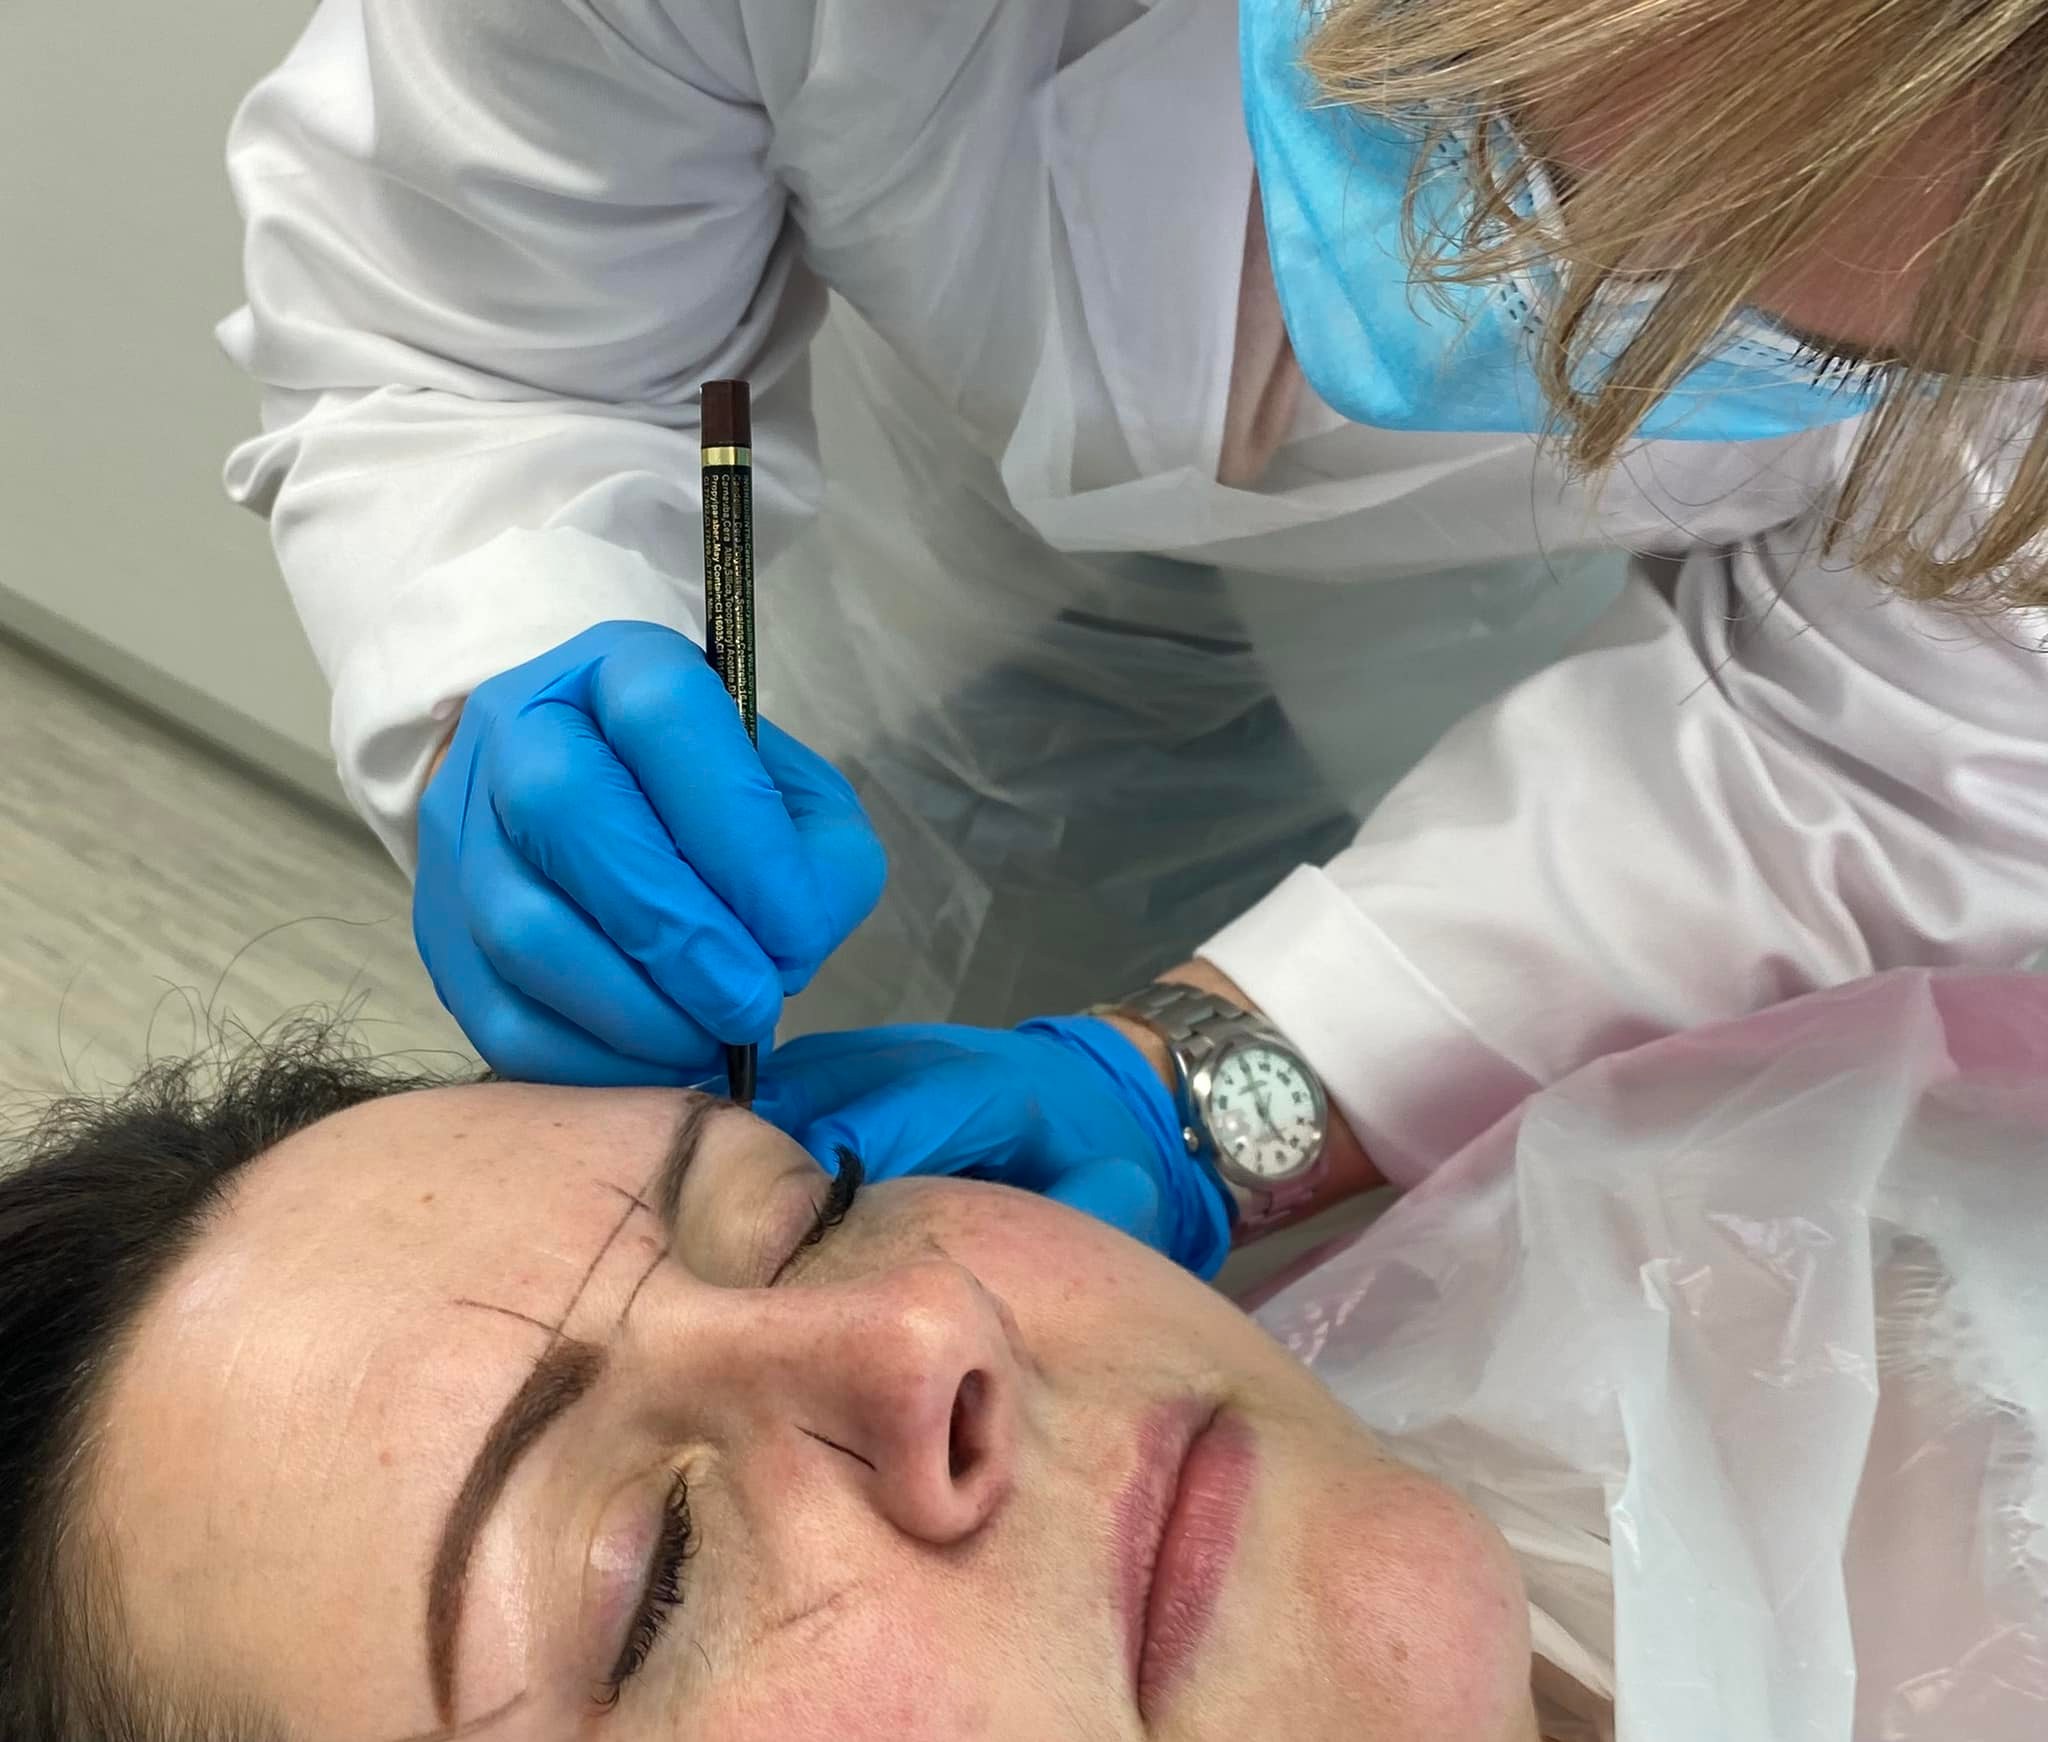 Vikki drawing on brows on her permanent makeup client during training.